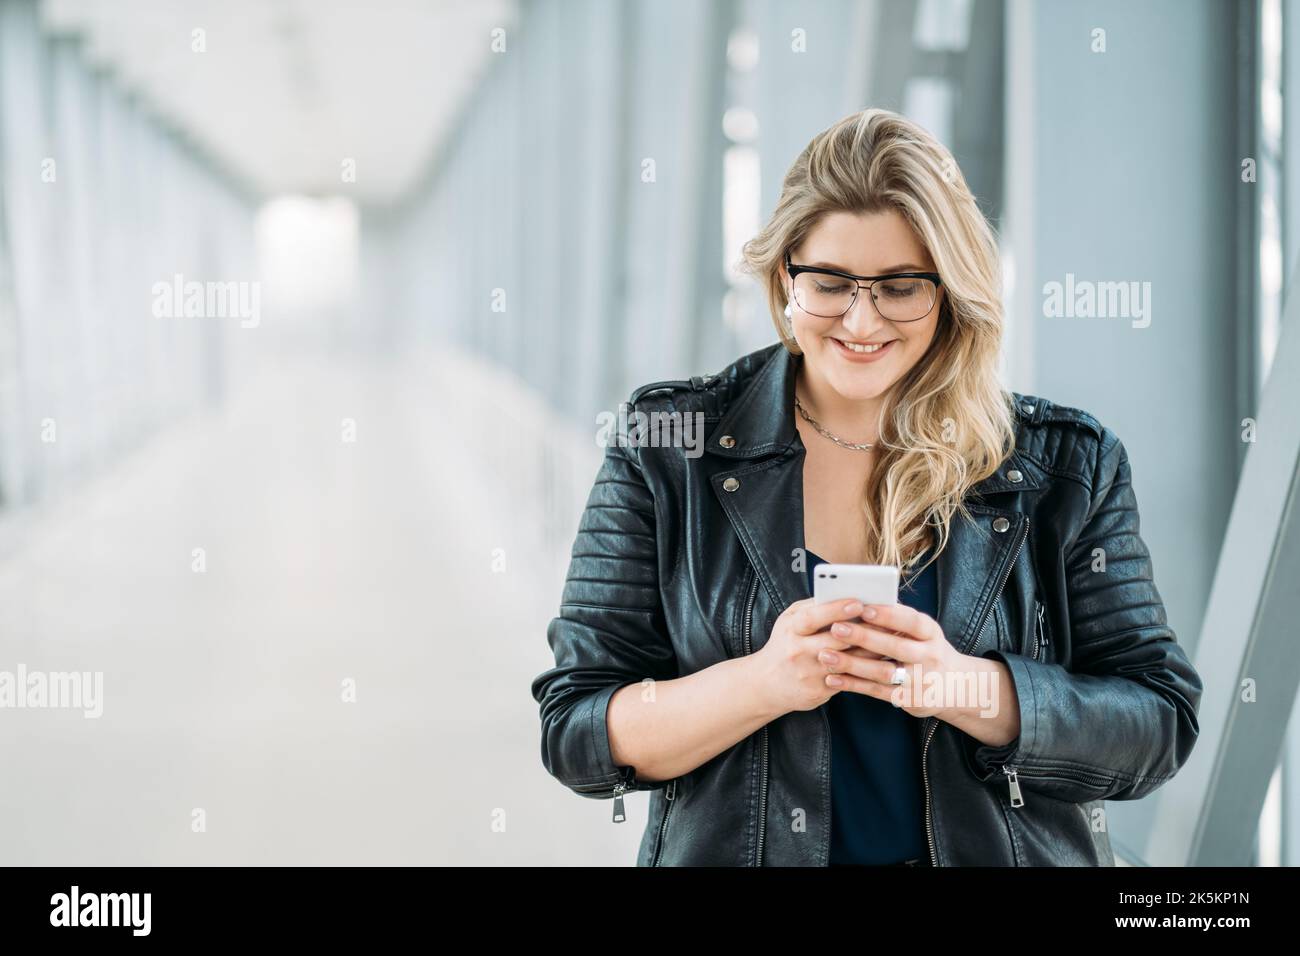 gadget people mobile communication obese woman Stock Photo